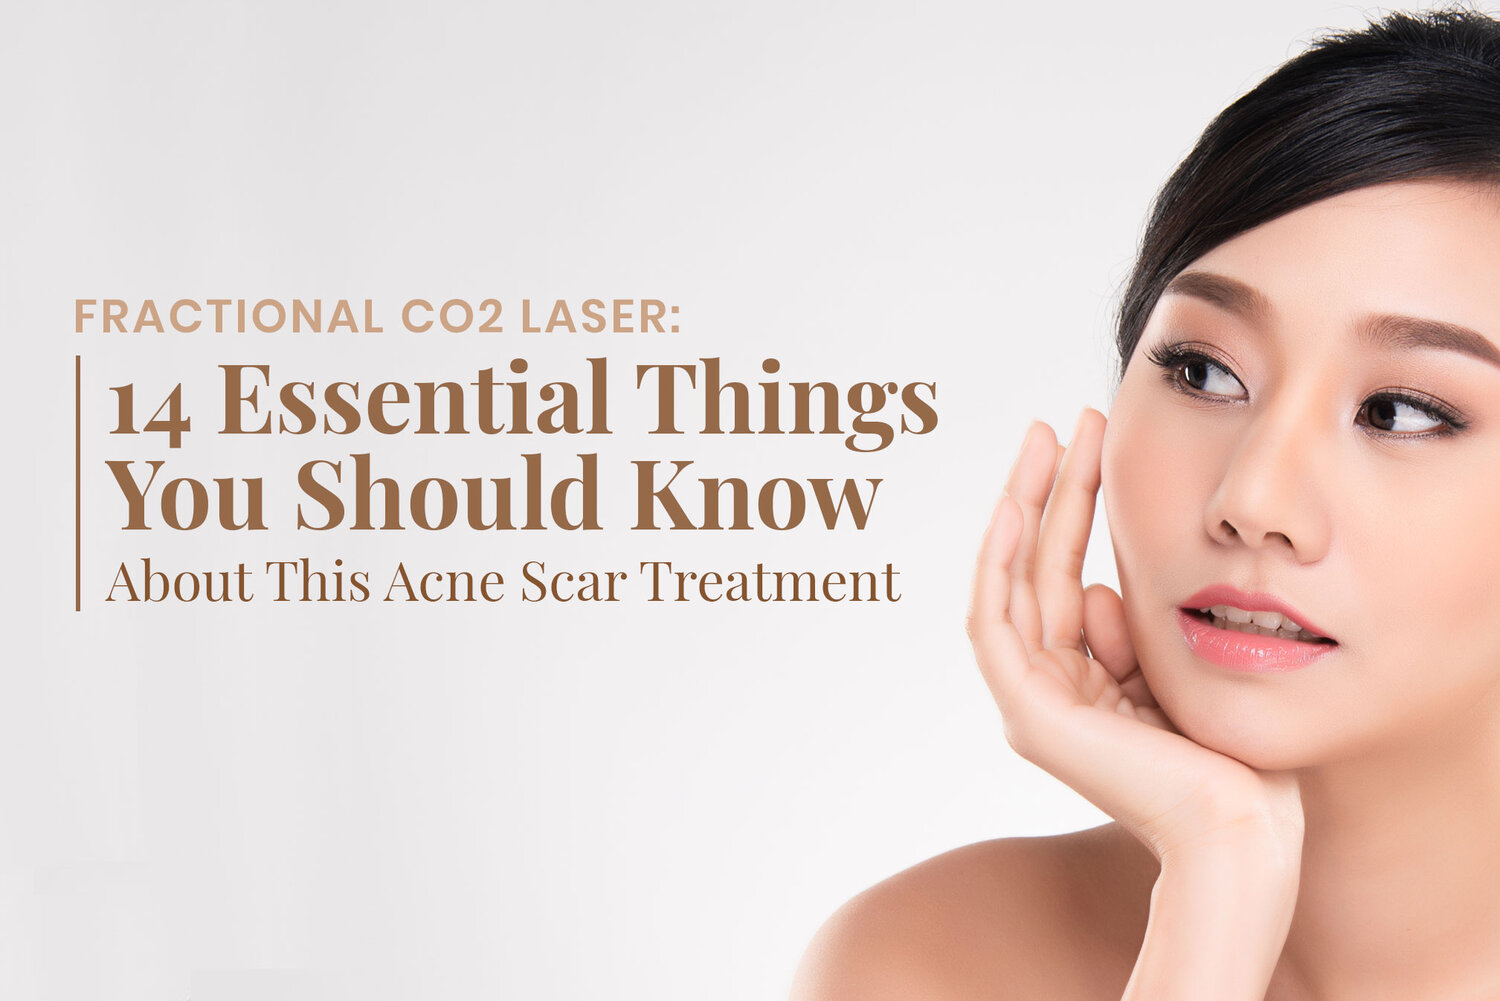 Title Fractional CO2 Laser 14 Essential Things You Should Know About This Acne Scar Treatment